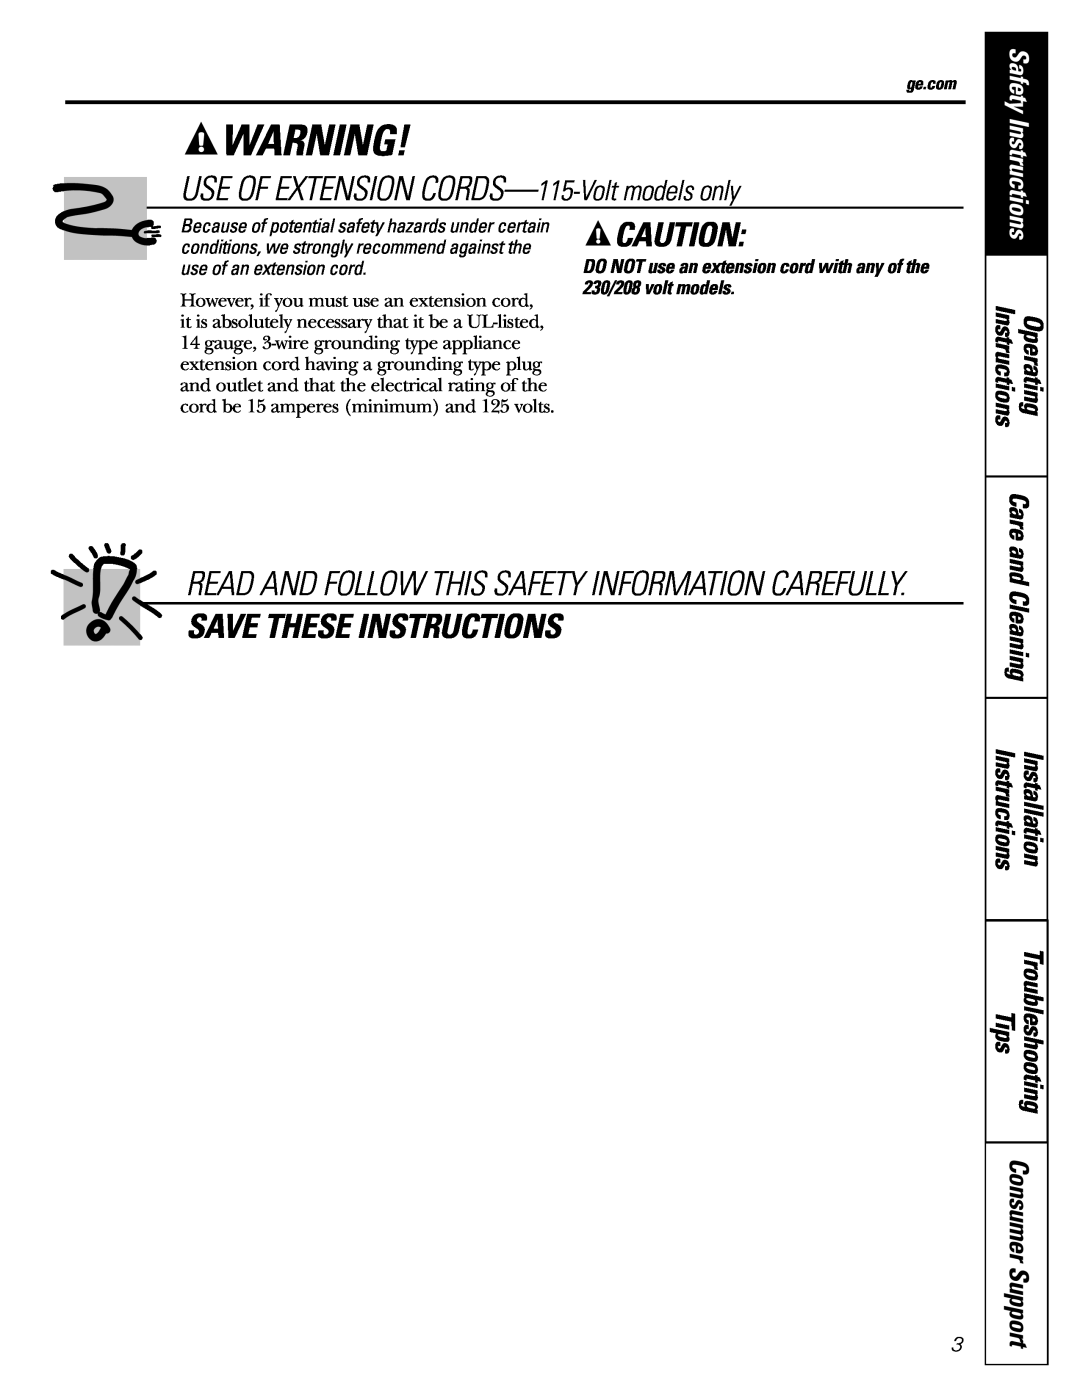 GE AEQ05 USE OF EXTENSION CORDS-115-Voltmodels only, Save These Instructions, Care and, Installation, Safety Instructions 